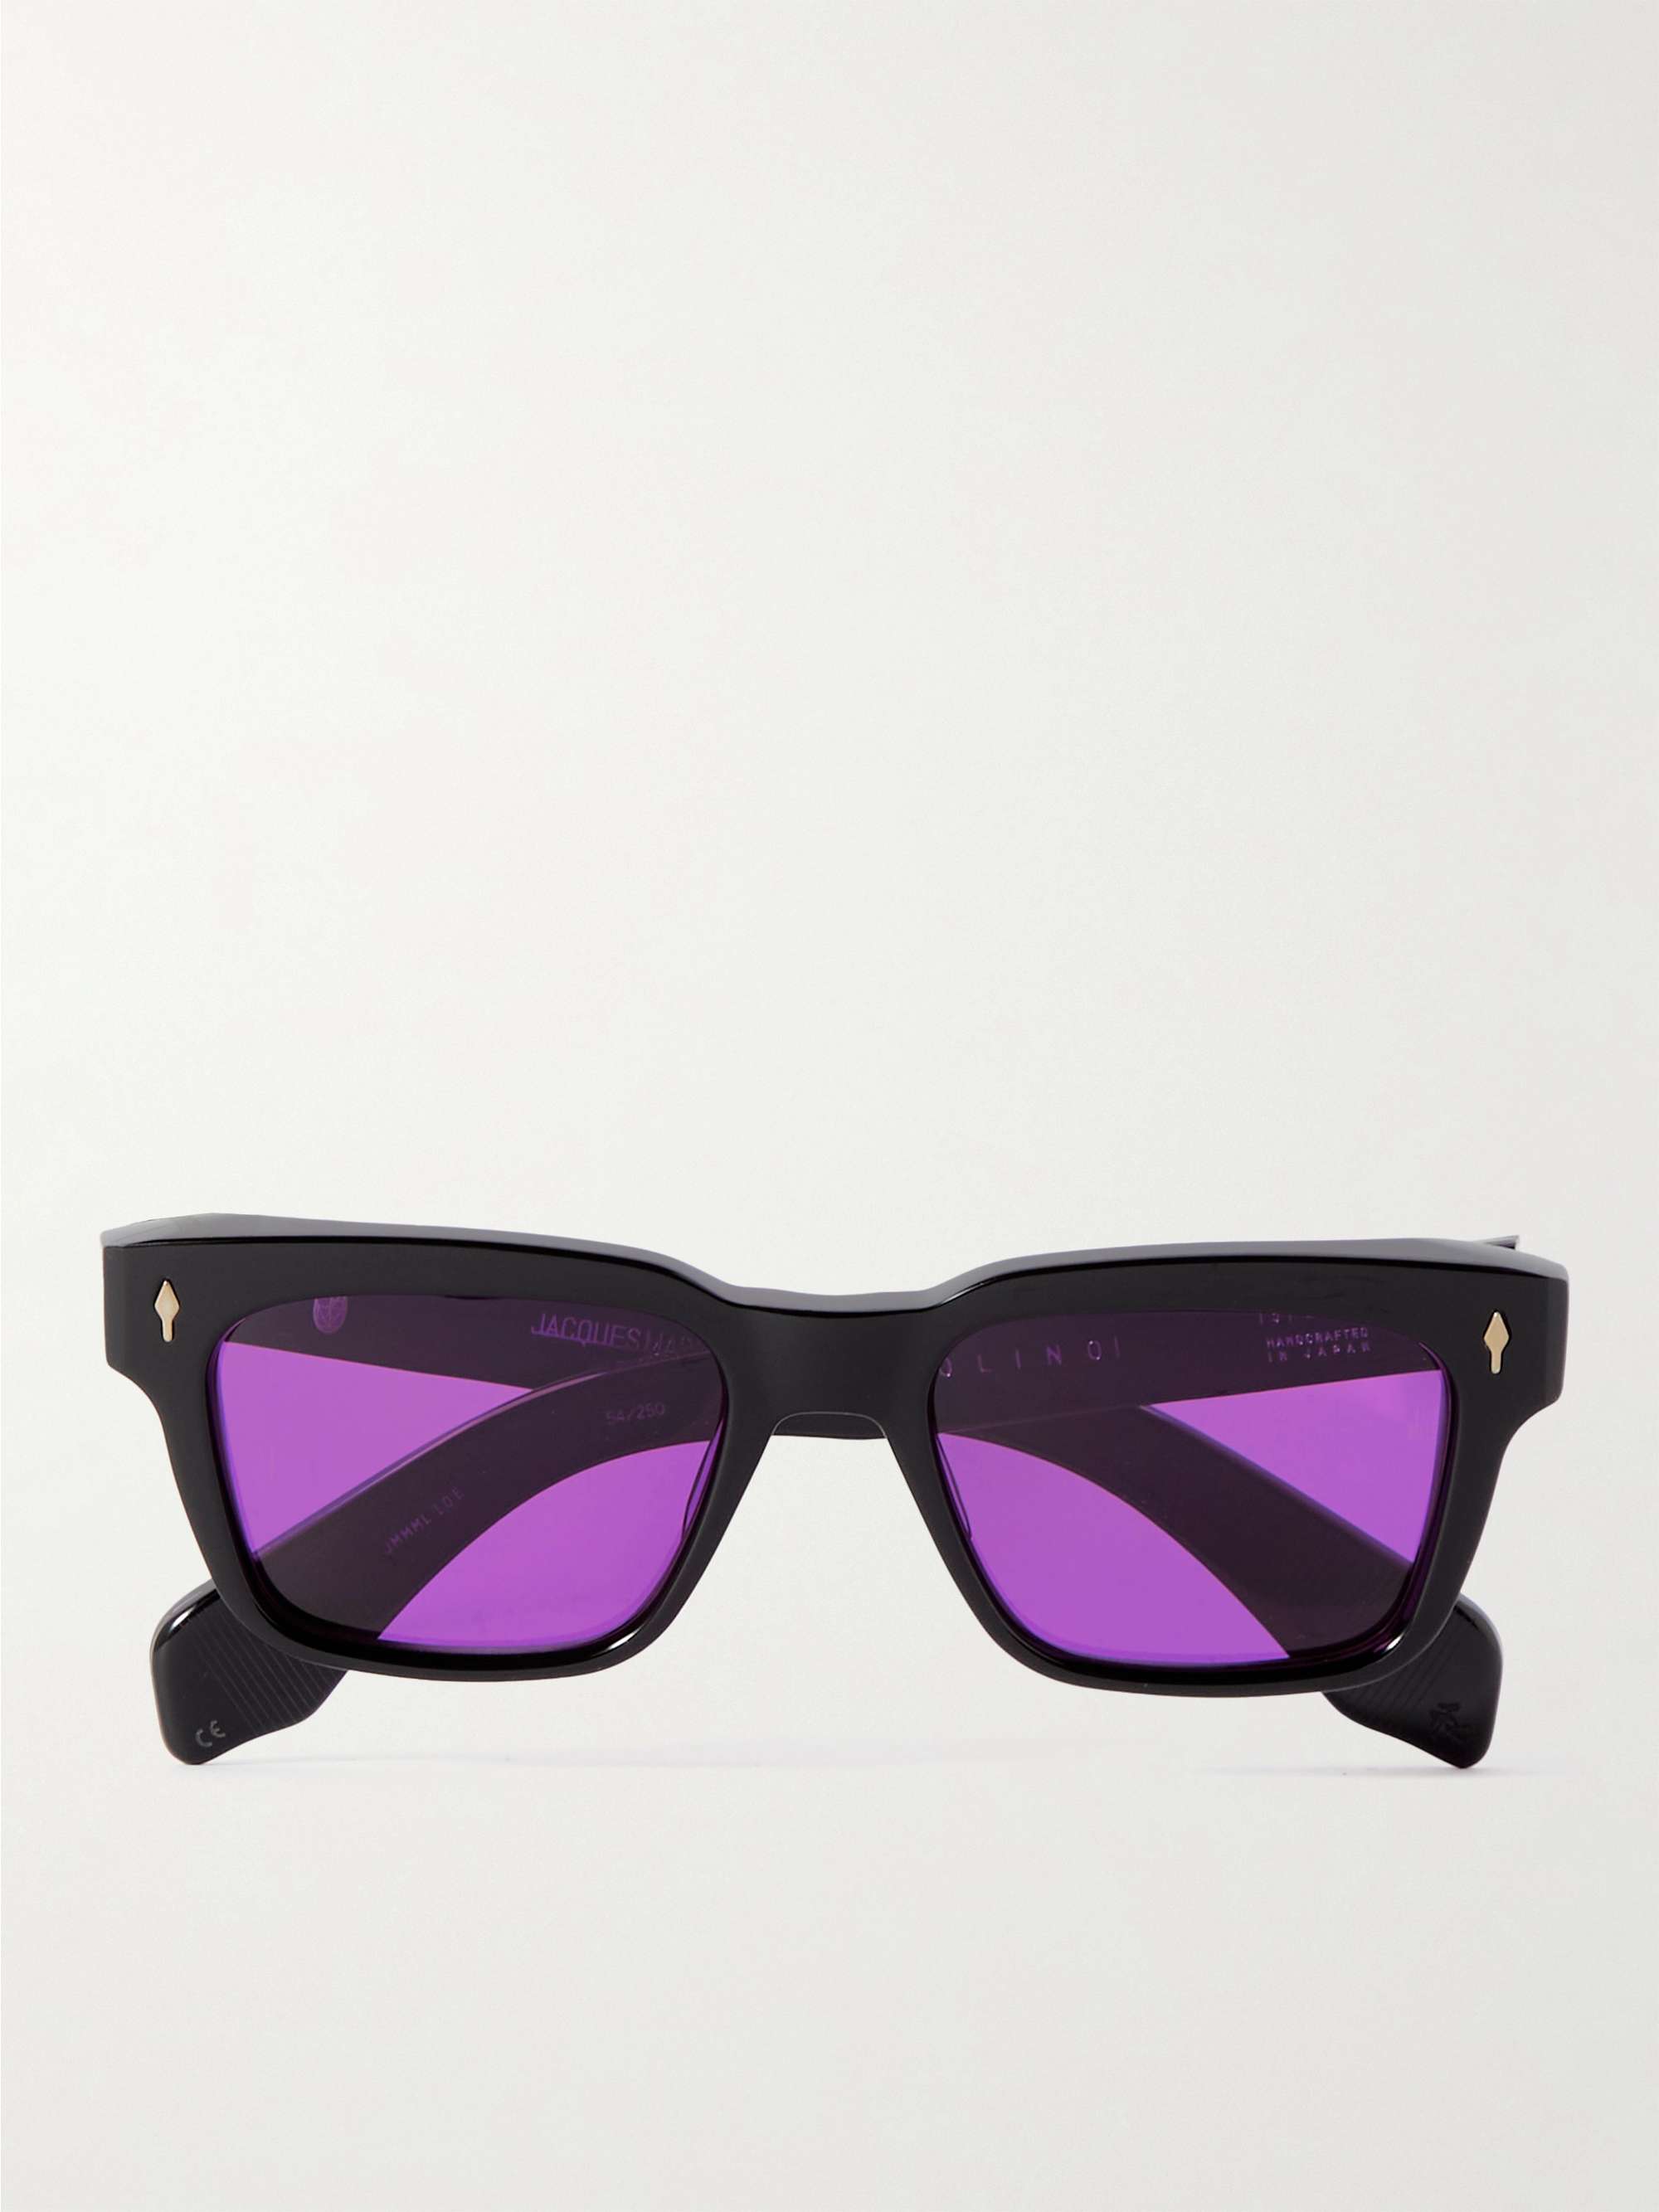 JACQUES MARIE MAGE Molino Abyss Square-Frame Acetate Sunglasses